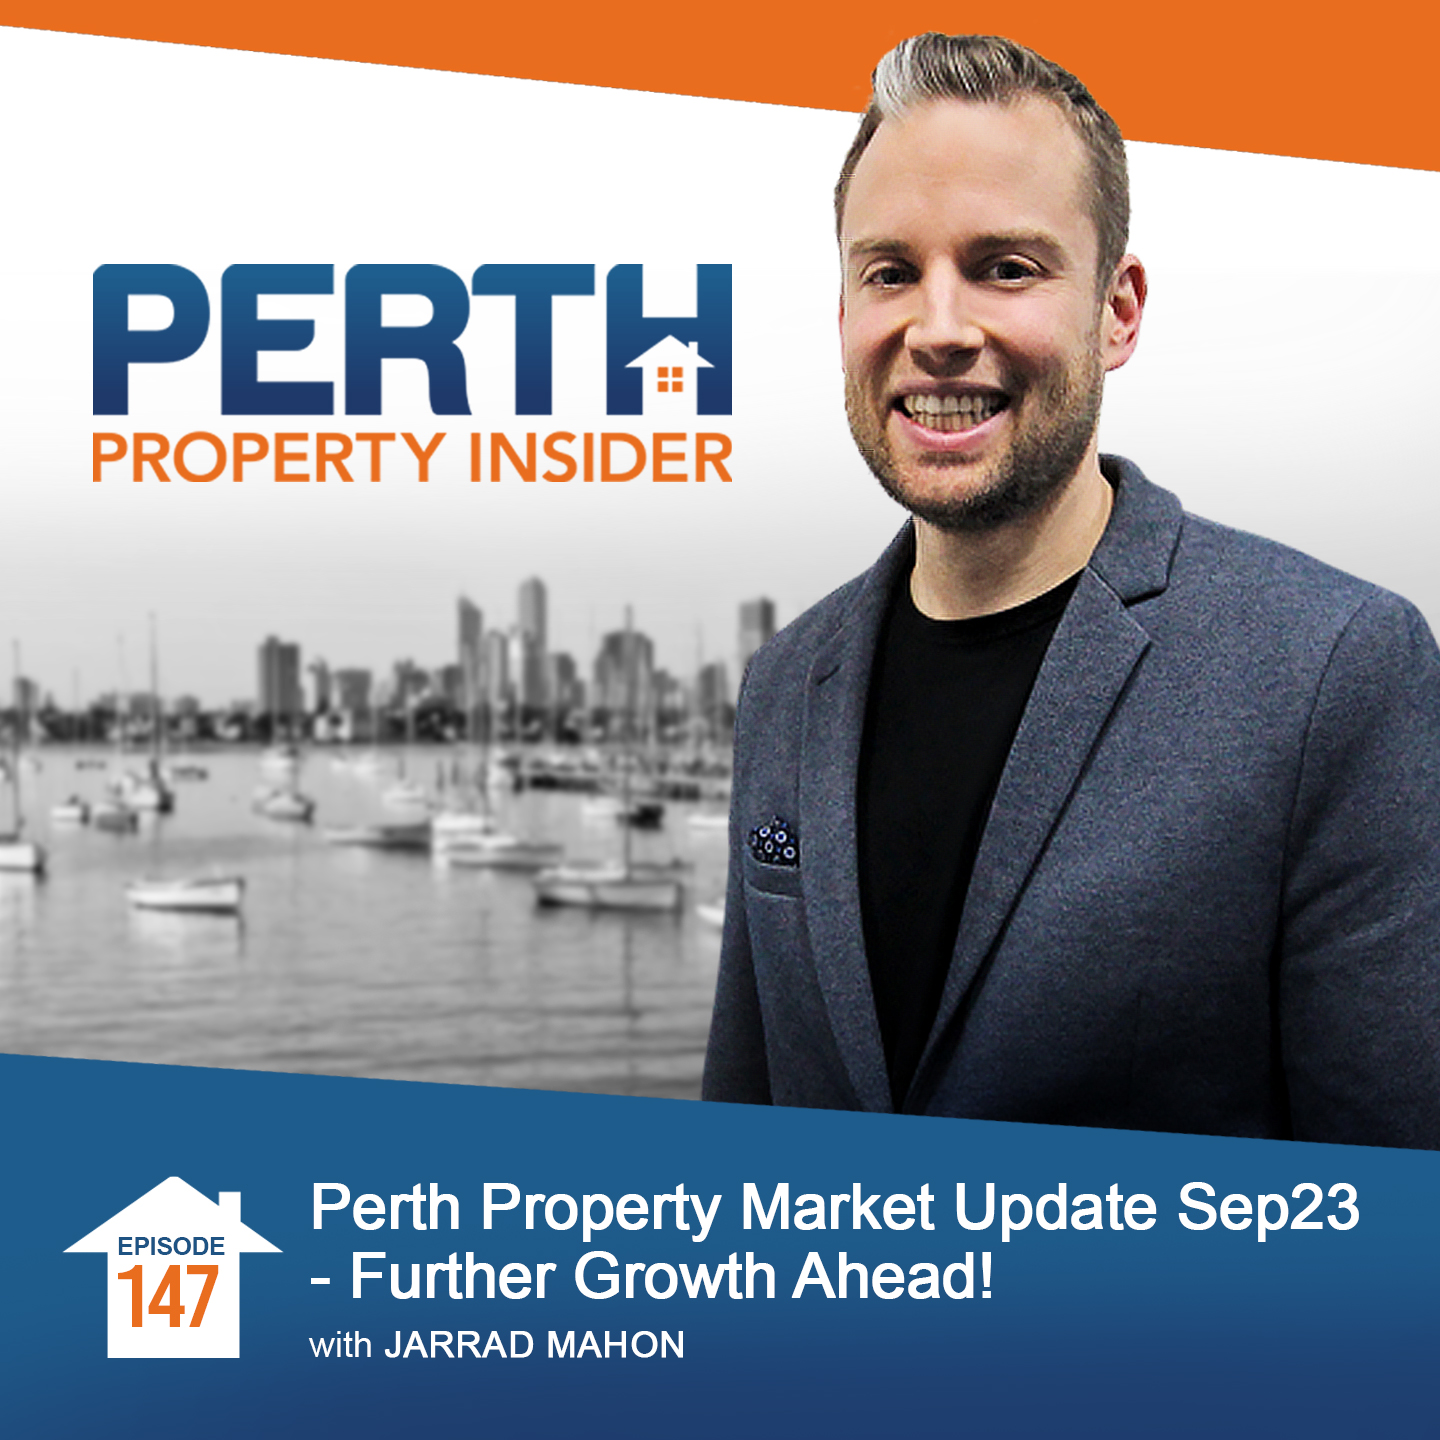 Perth Property Market Update Sep23 - Further Growth Ahead!